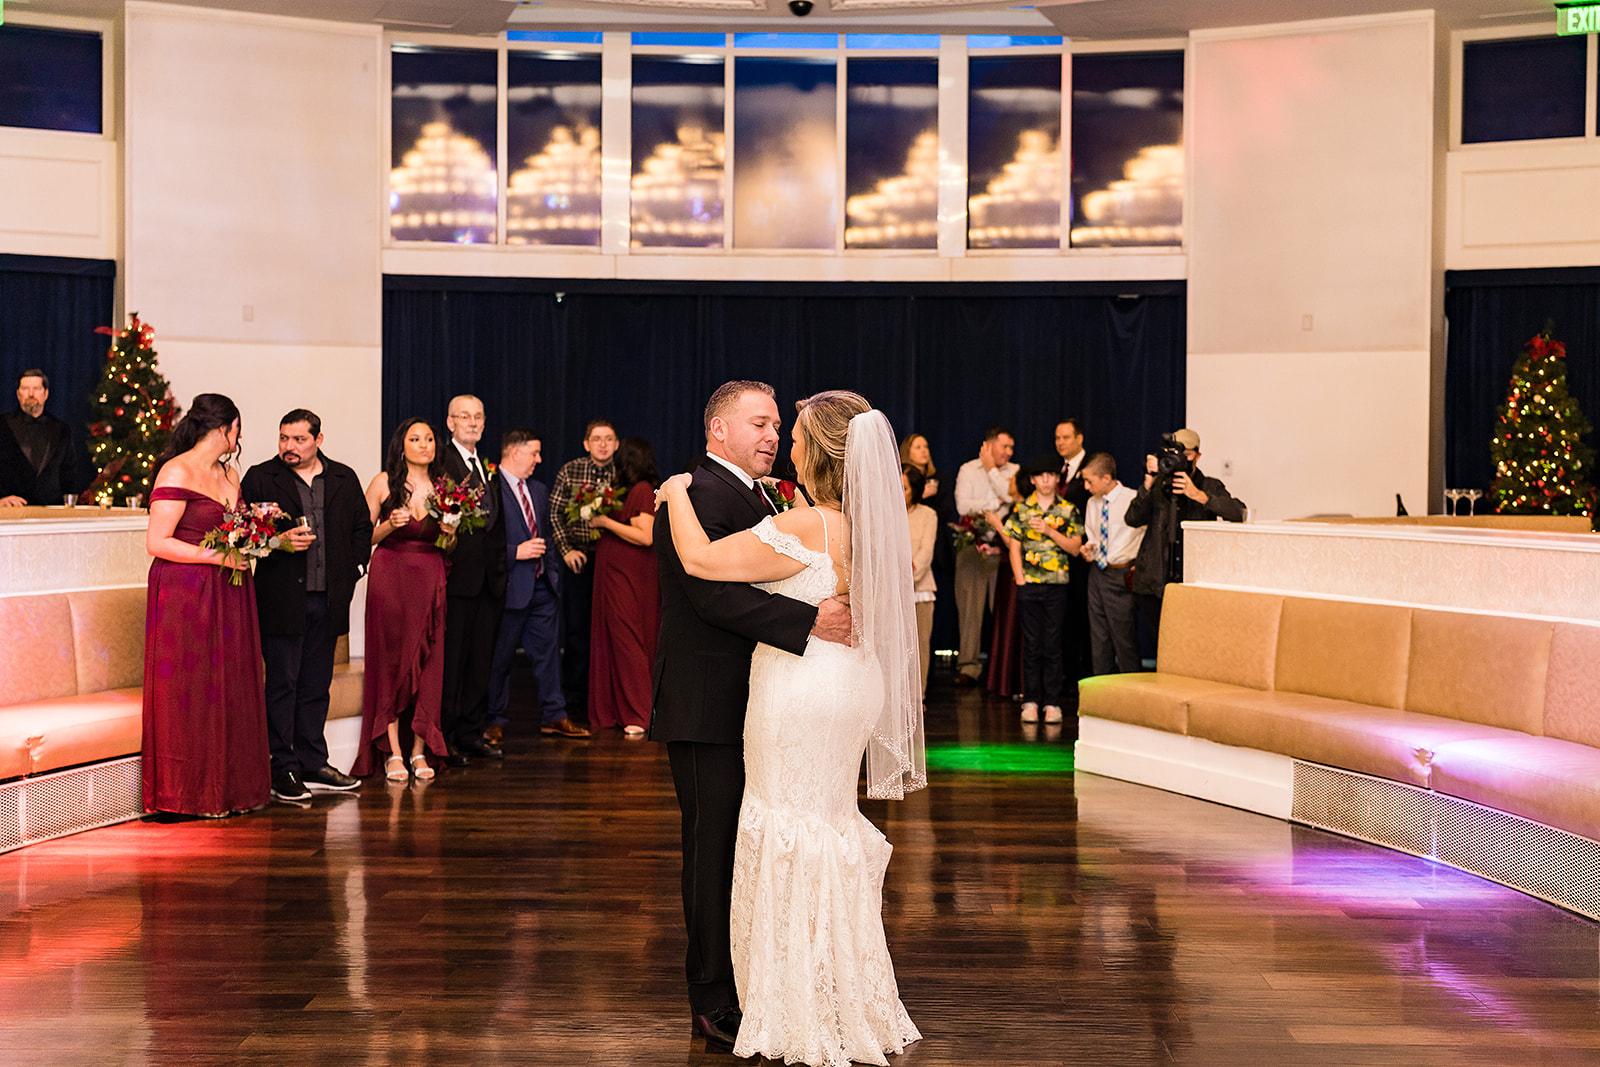 Bride and groom sharing a dance at their wedding reception at the Havana Room Tropicana